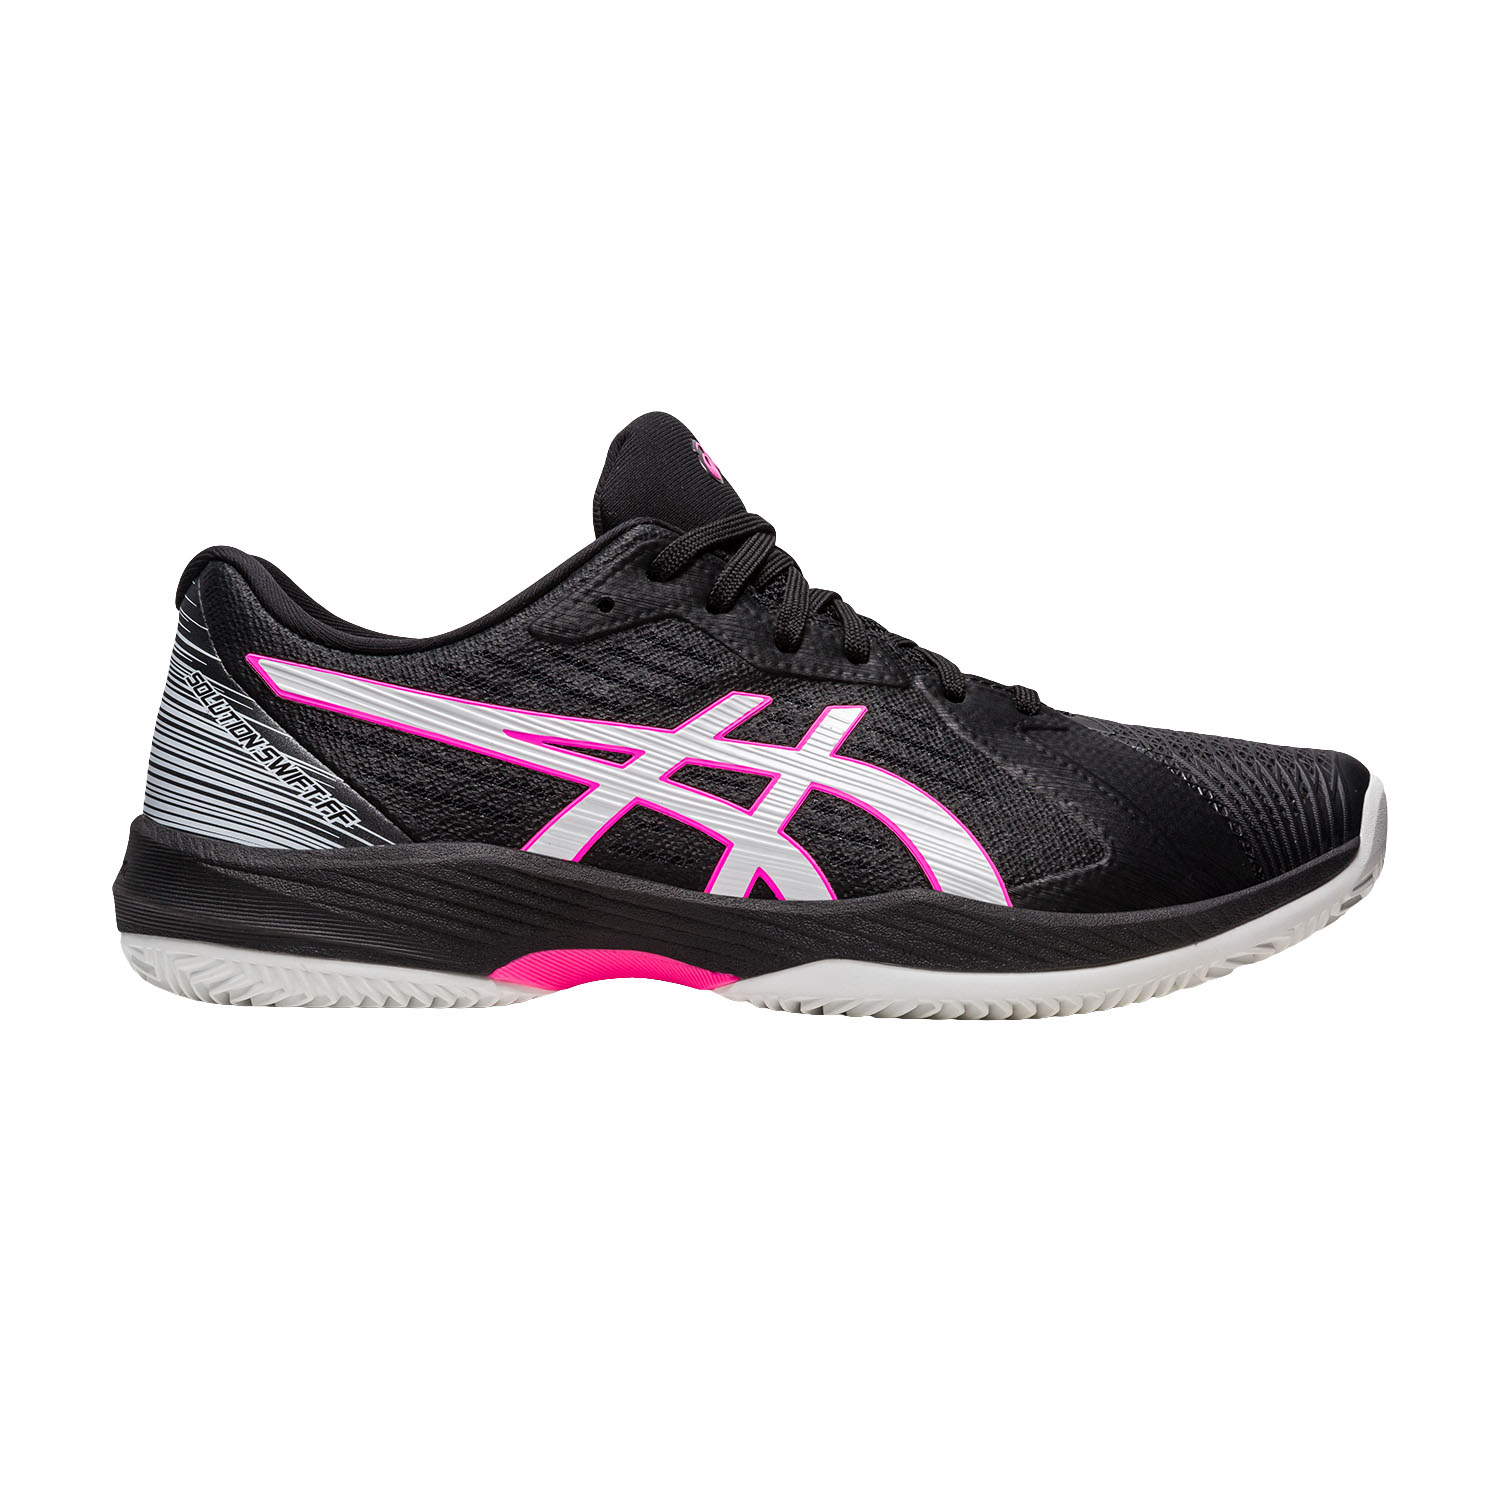 Asics Solution Swift FF Clay Men's Tennis Shoes - Black/Hot Pink